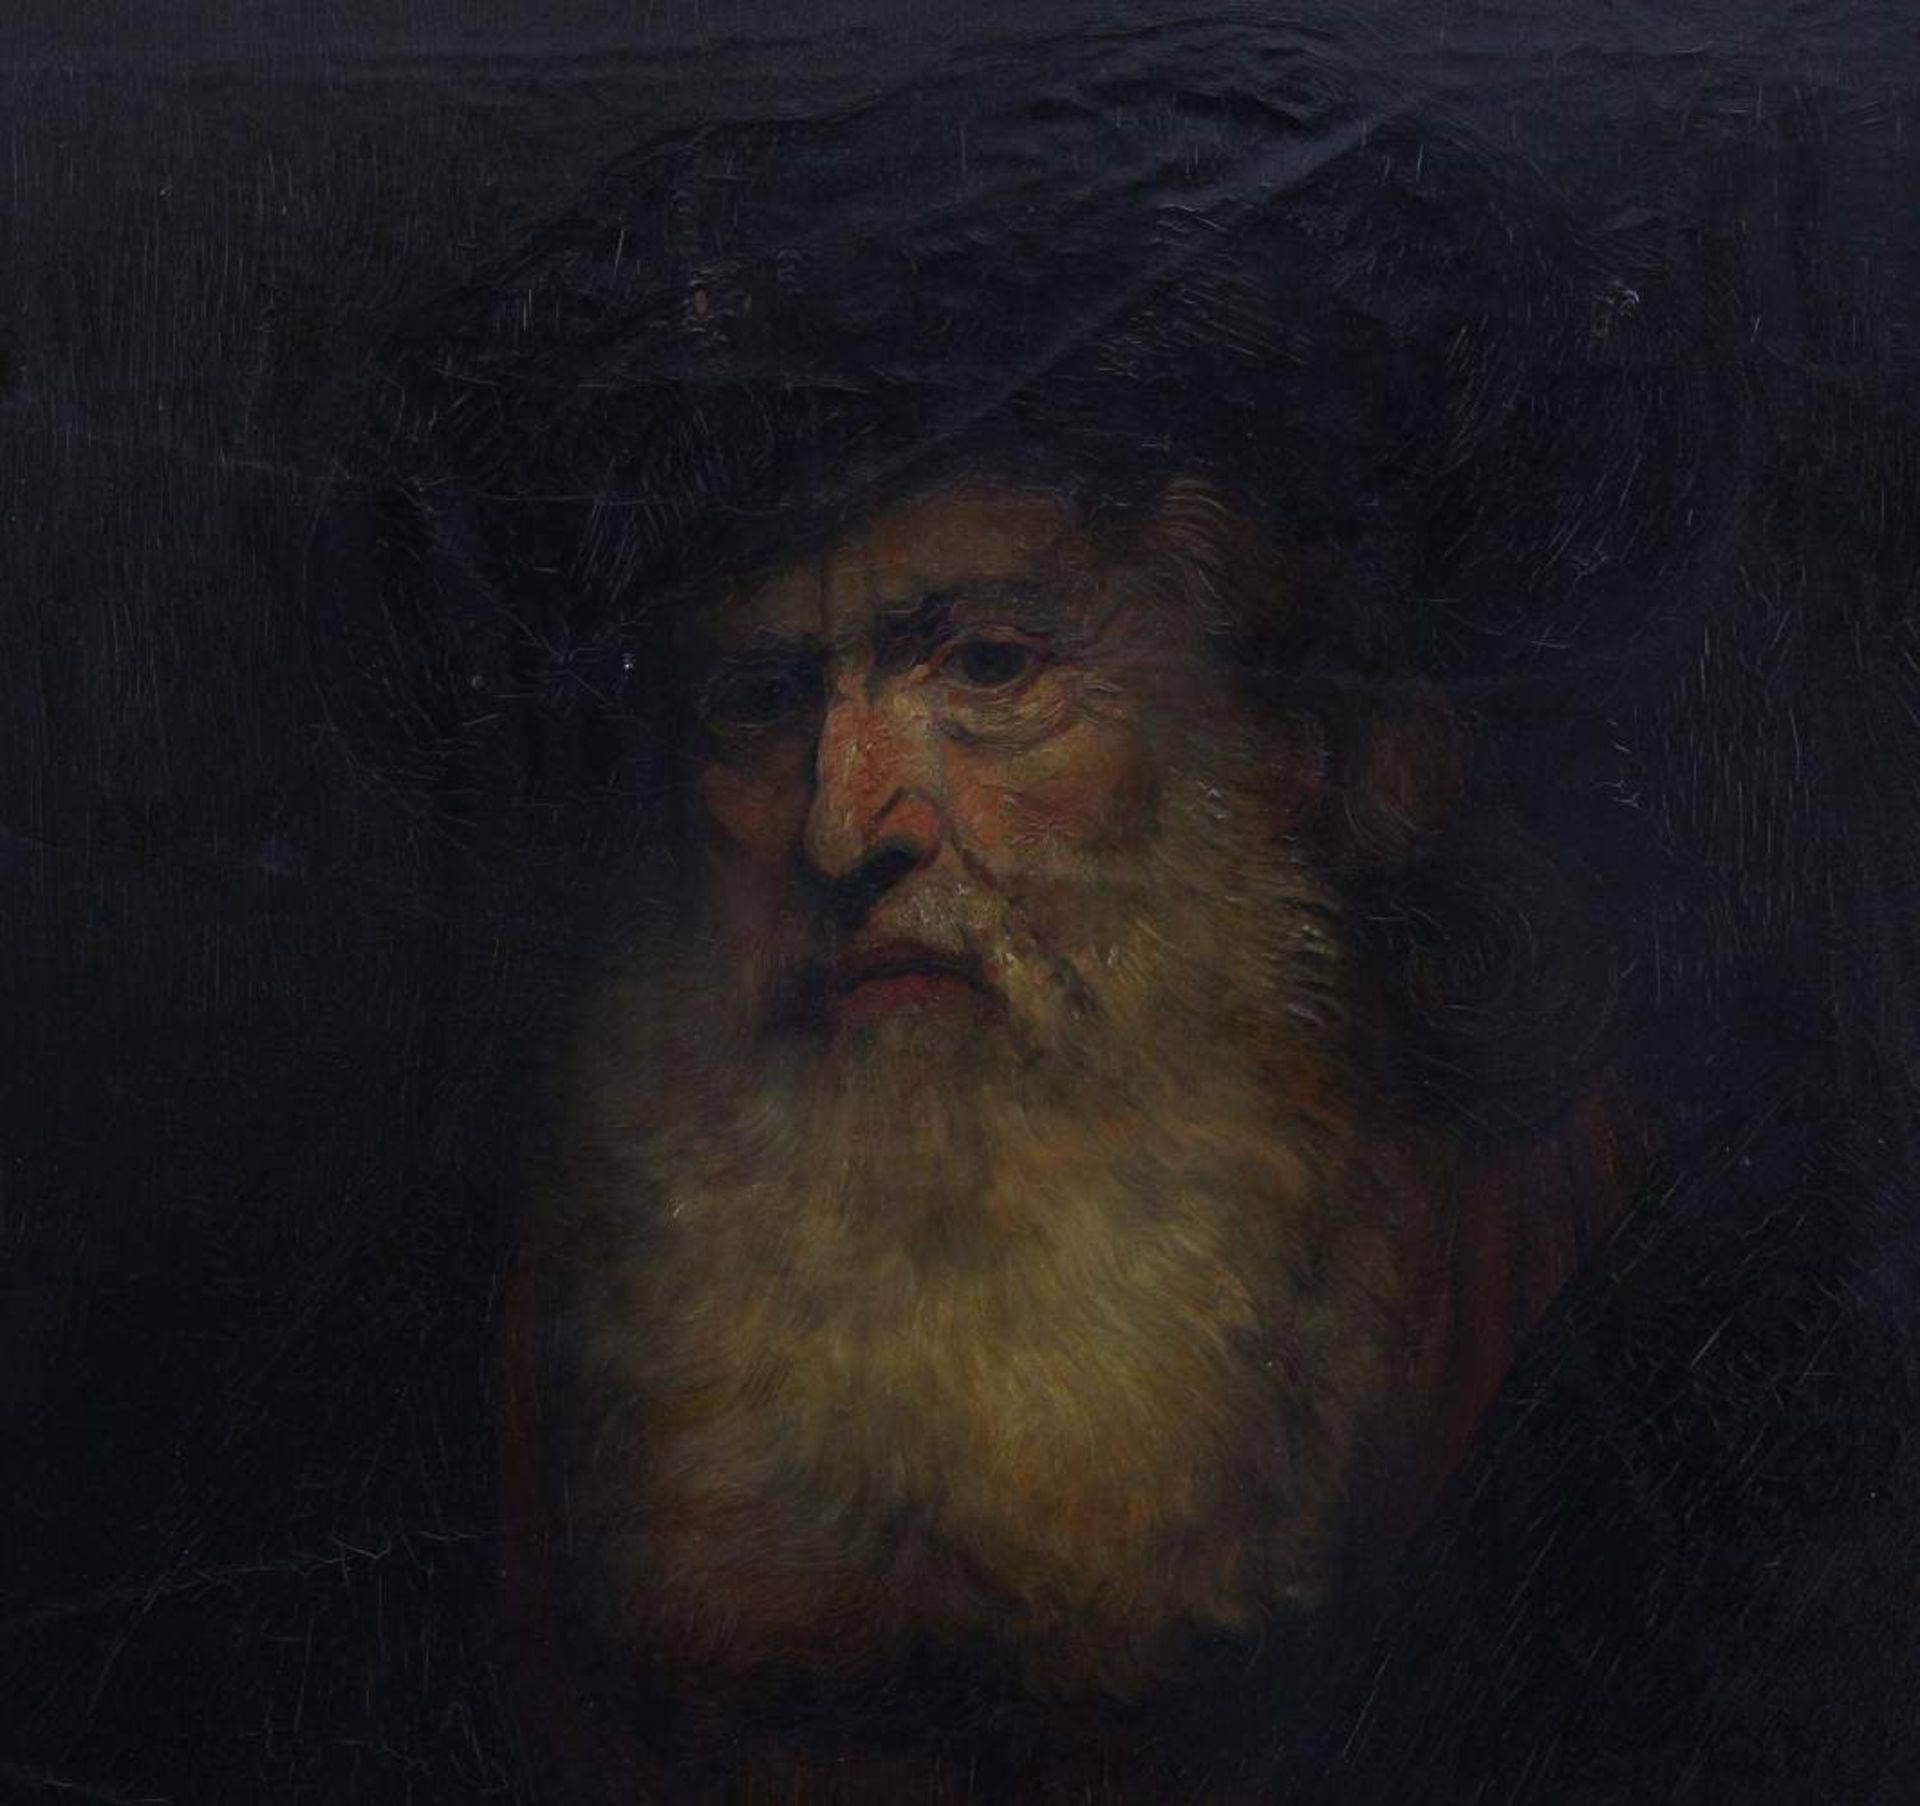 German 20th century painter  Painting, oil on canvas, portrait of an elderly man after Rembrandt van - Image 3 of 4